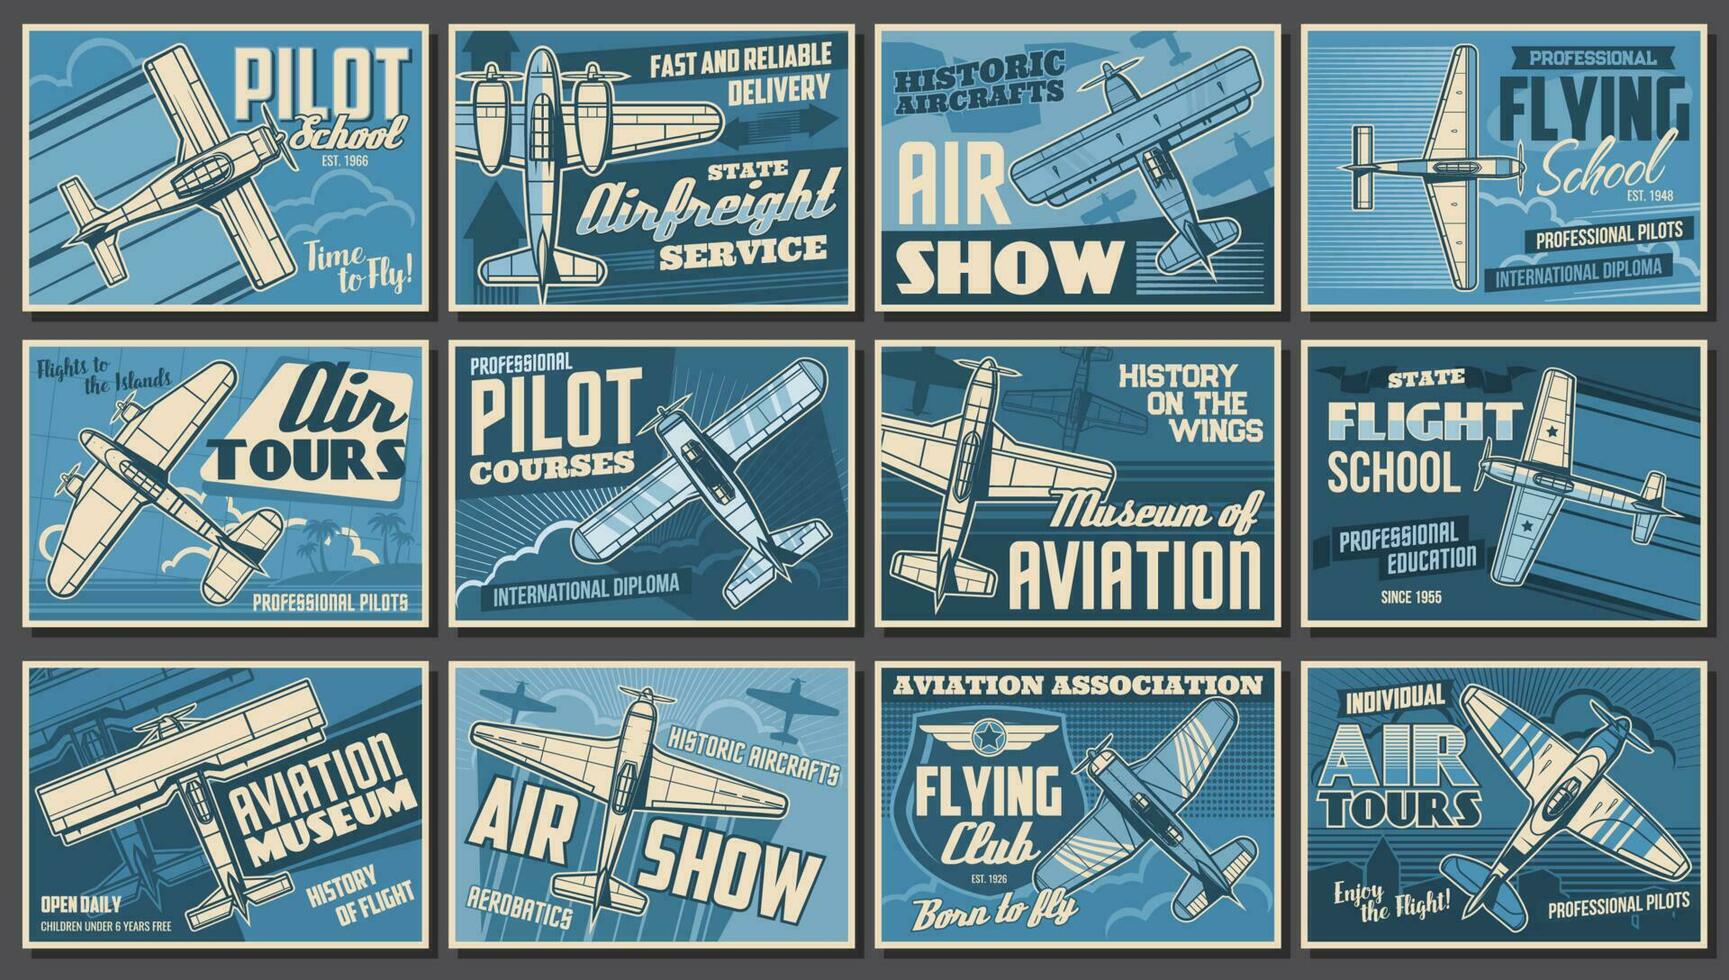 Aviation show, airplanes and aviator club posters vector